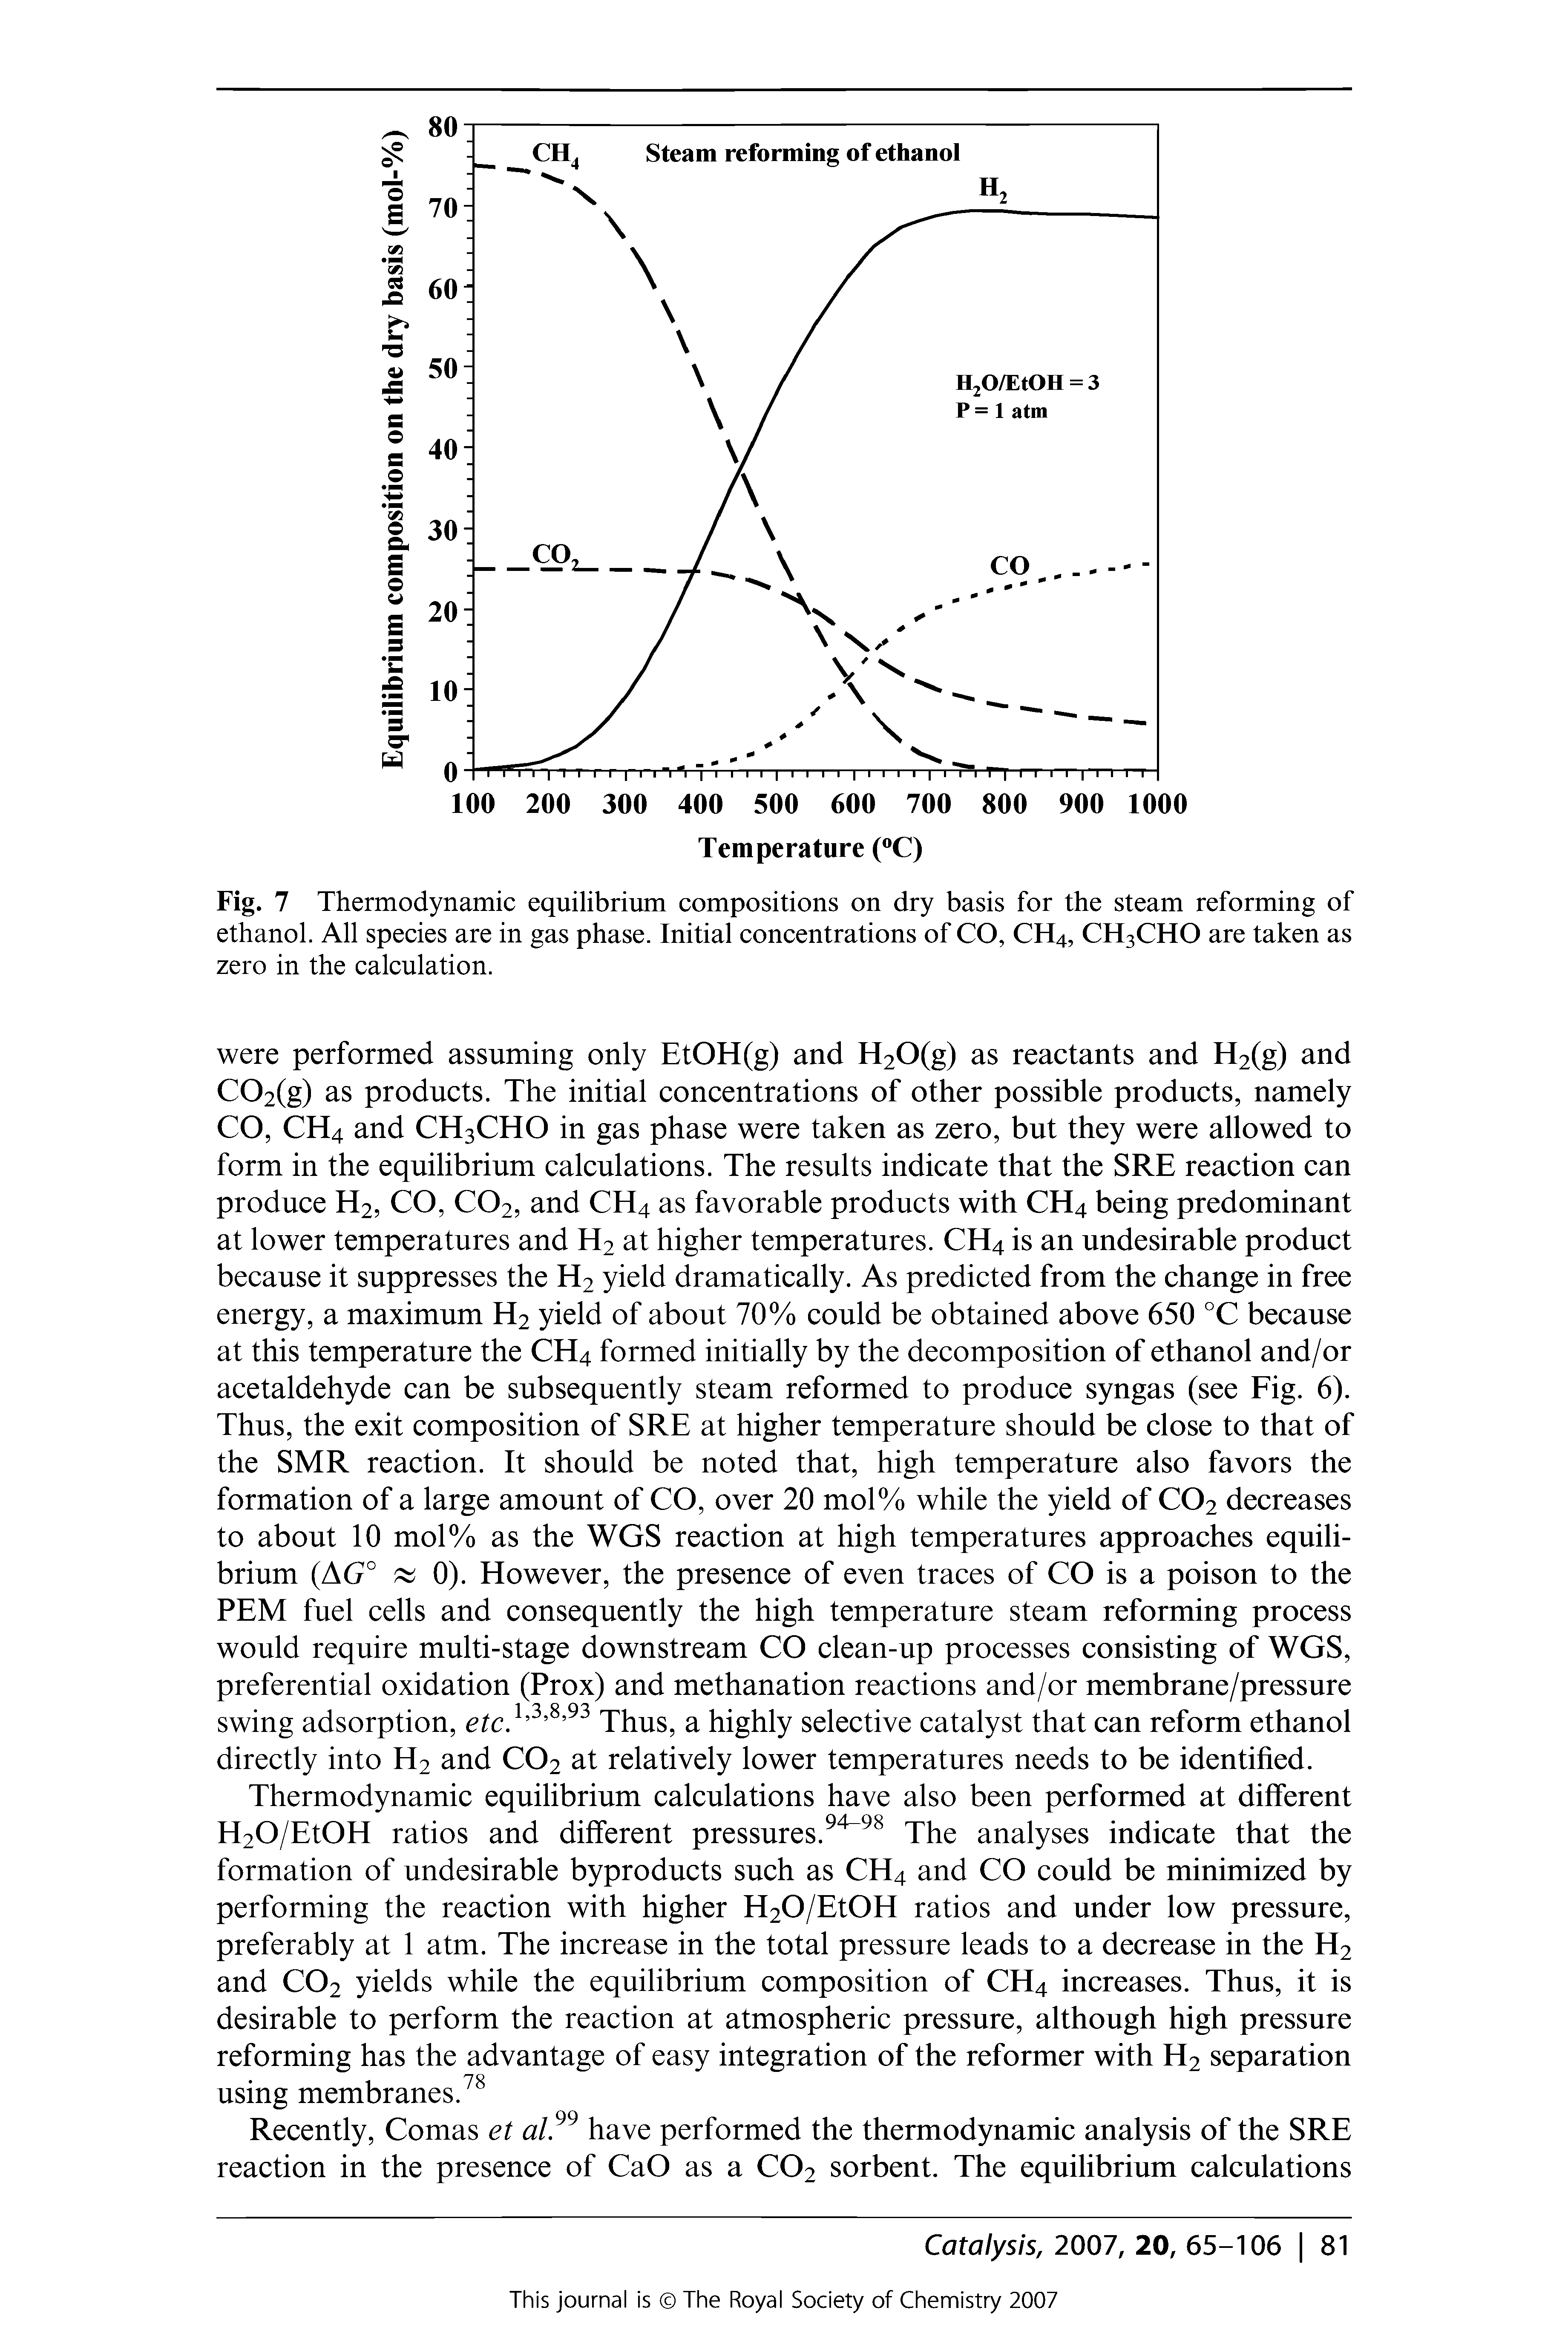 Fig. 7 Thermodynamic equilibrium compositions on dry basis for the steam reforming of ethanol. All species are in gas phase. Initial concentrations of CO, CH4, CH3CHO are taken as zero in the calculation.